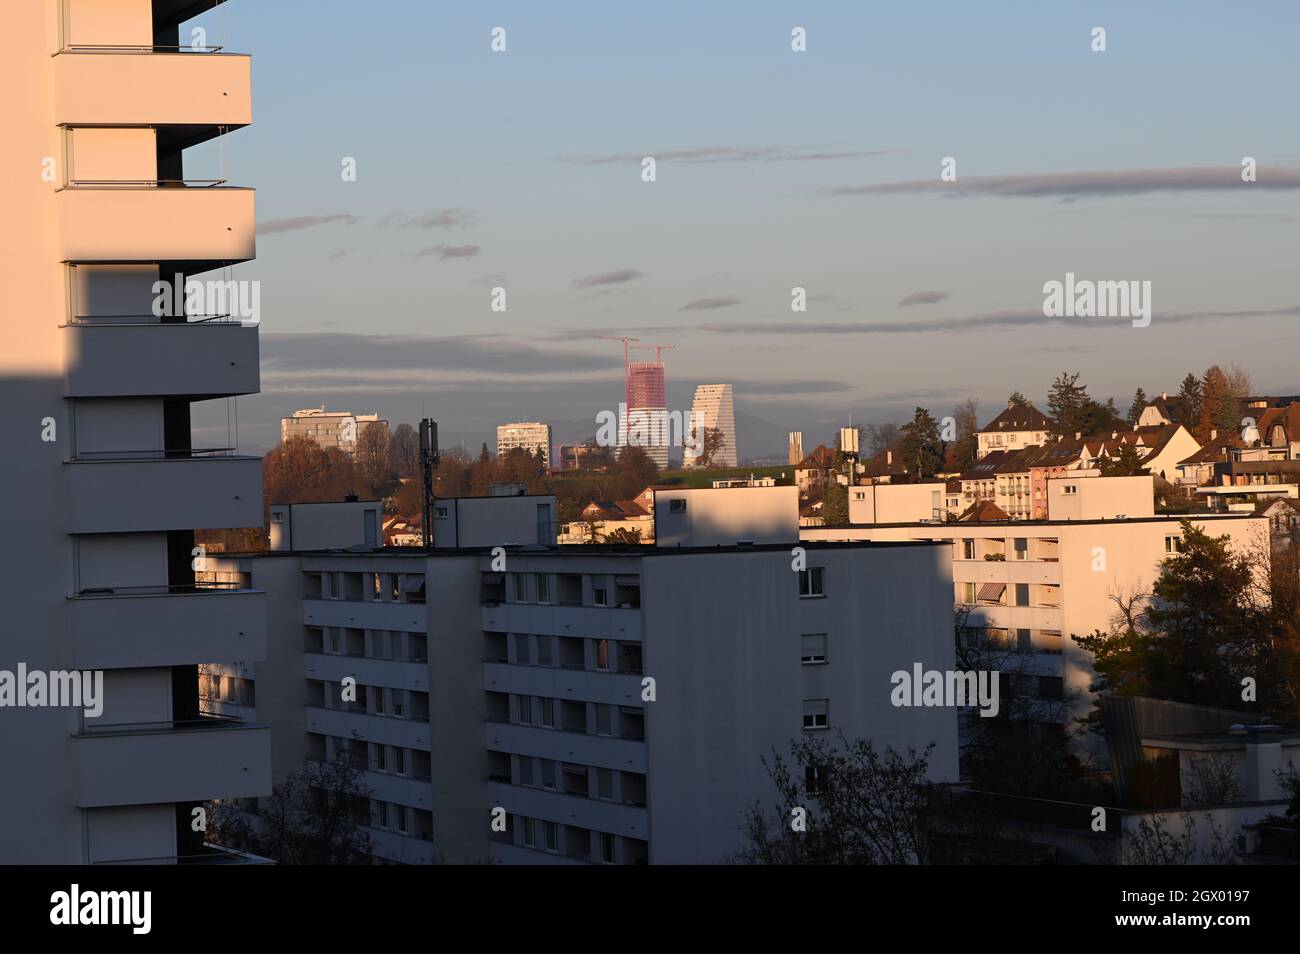 The Light Of The Evening Sun Over The City In Autumn Stock Photo